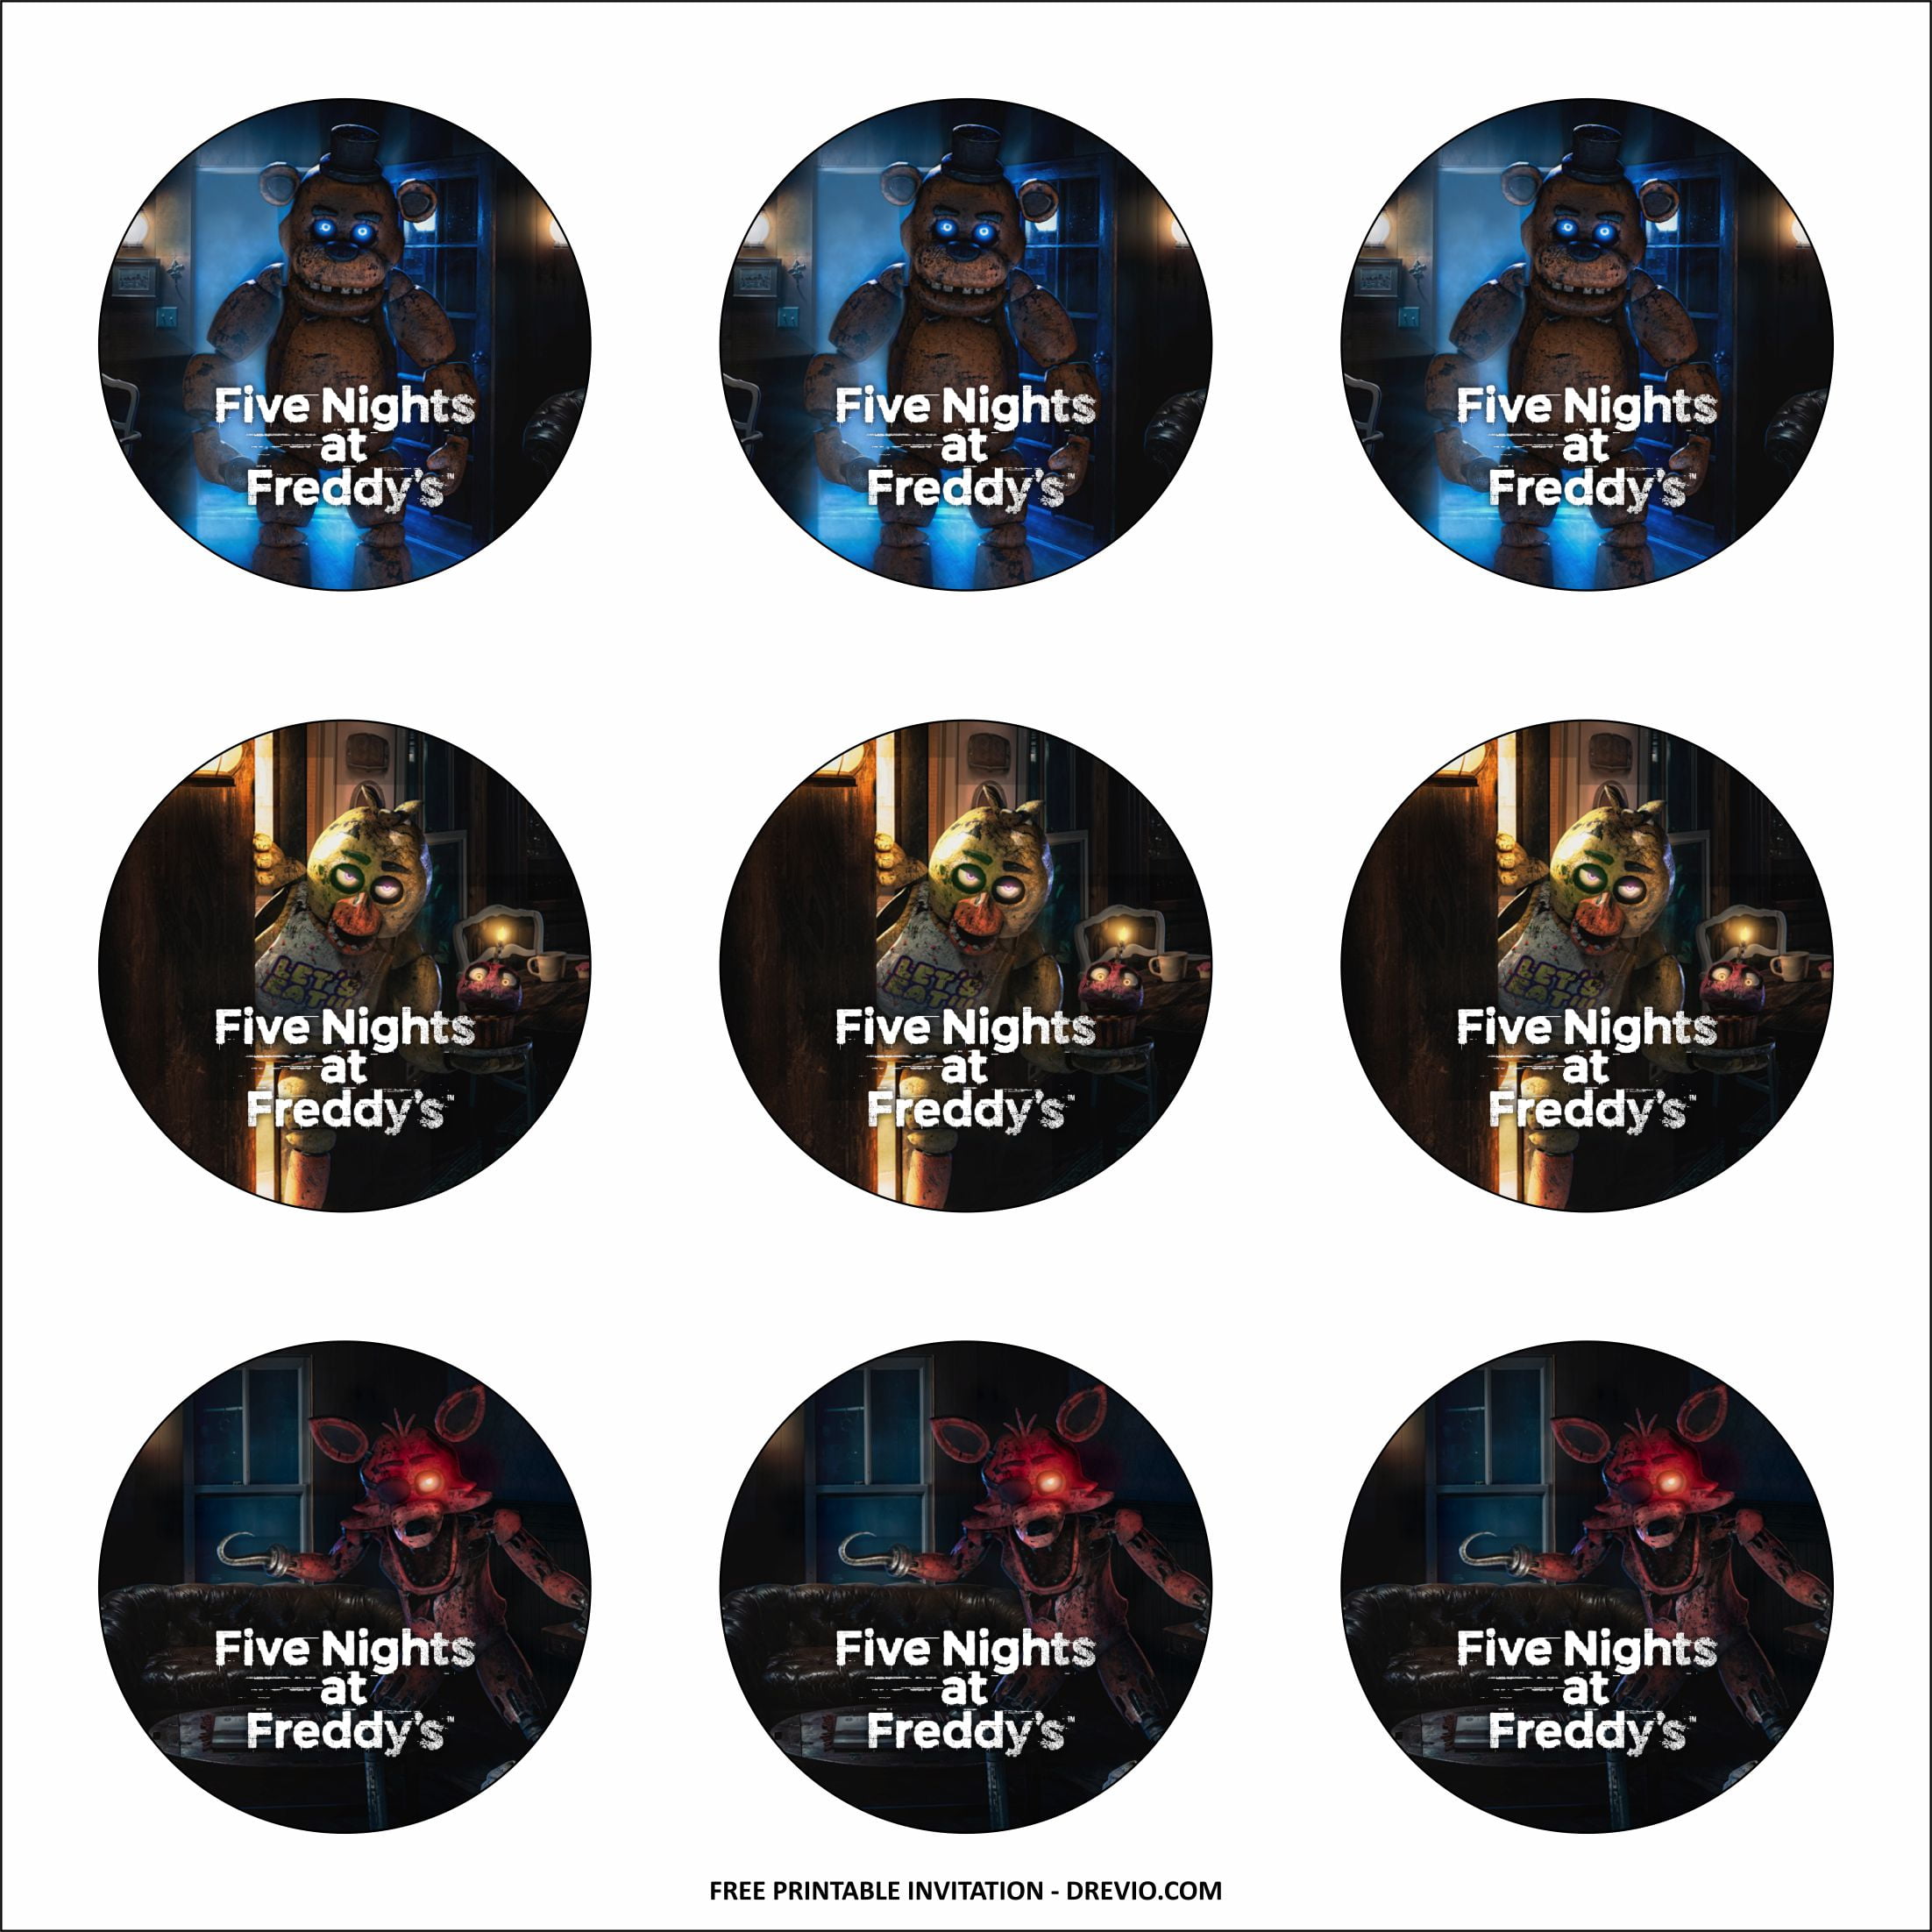 Five Nights at Freddy's Cupcake Toppers PDF Printable Instant Download Top Quality